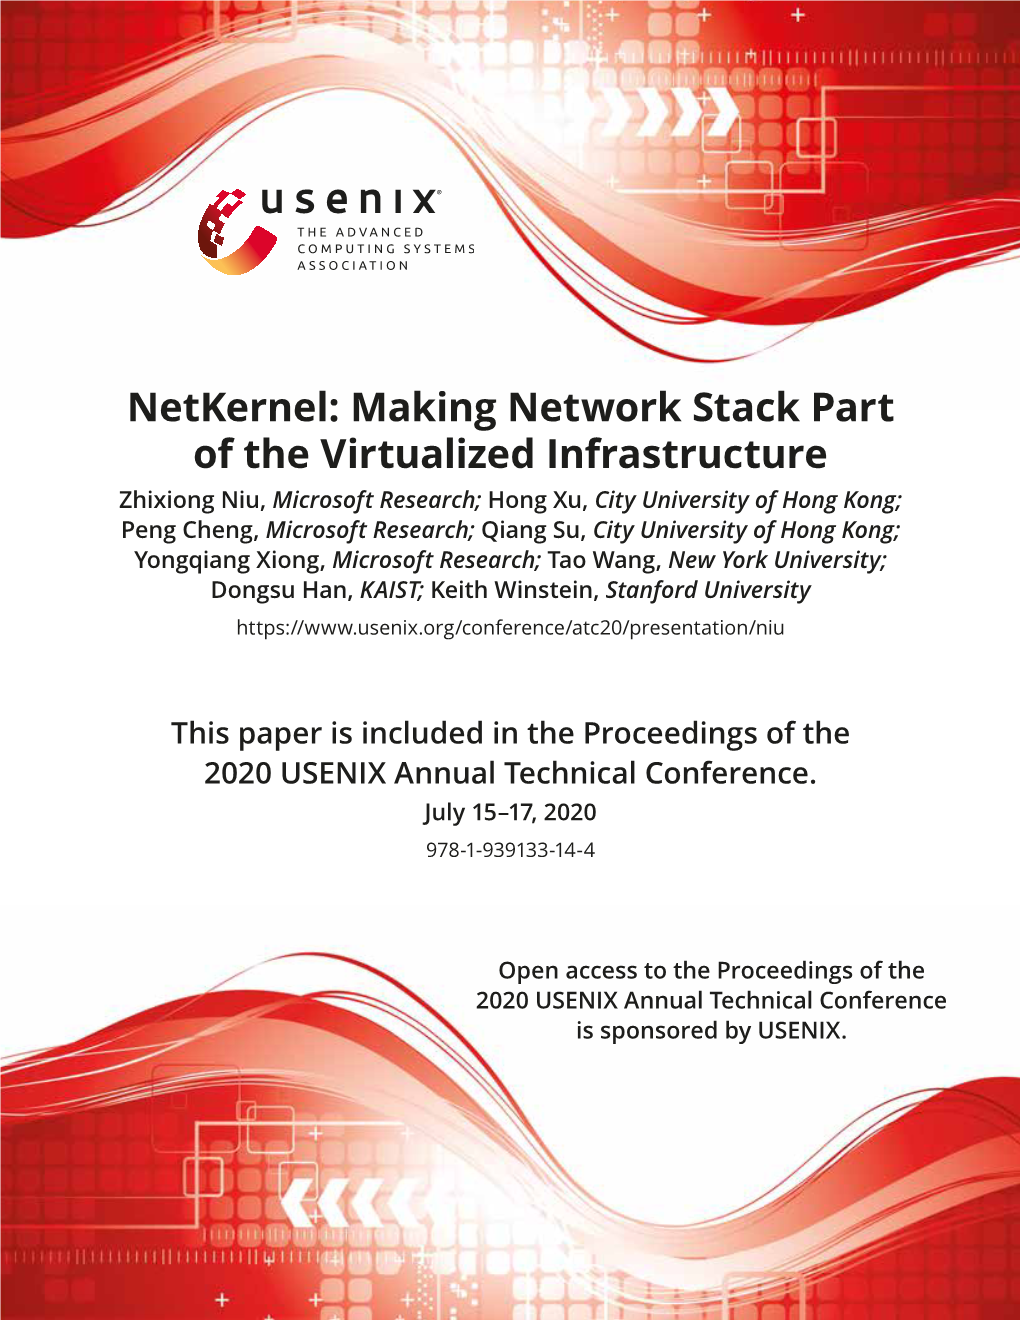 Netkernel: Making Network Stack Part of the Virtualized Infrastructure